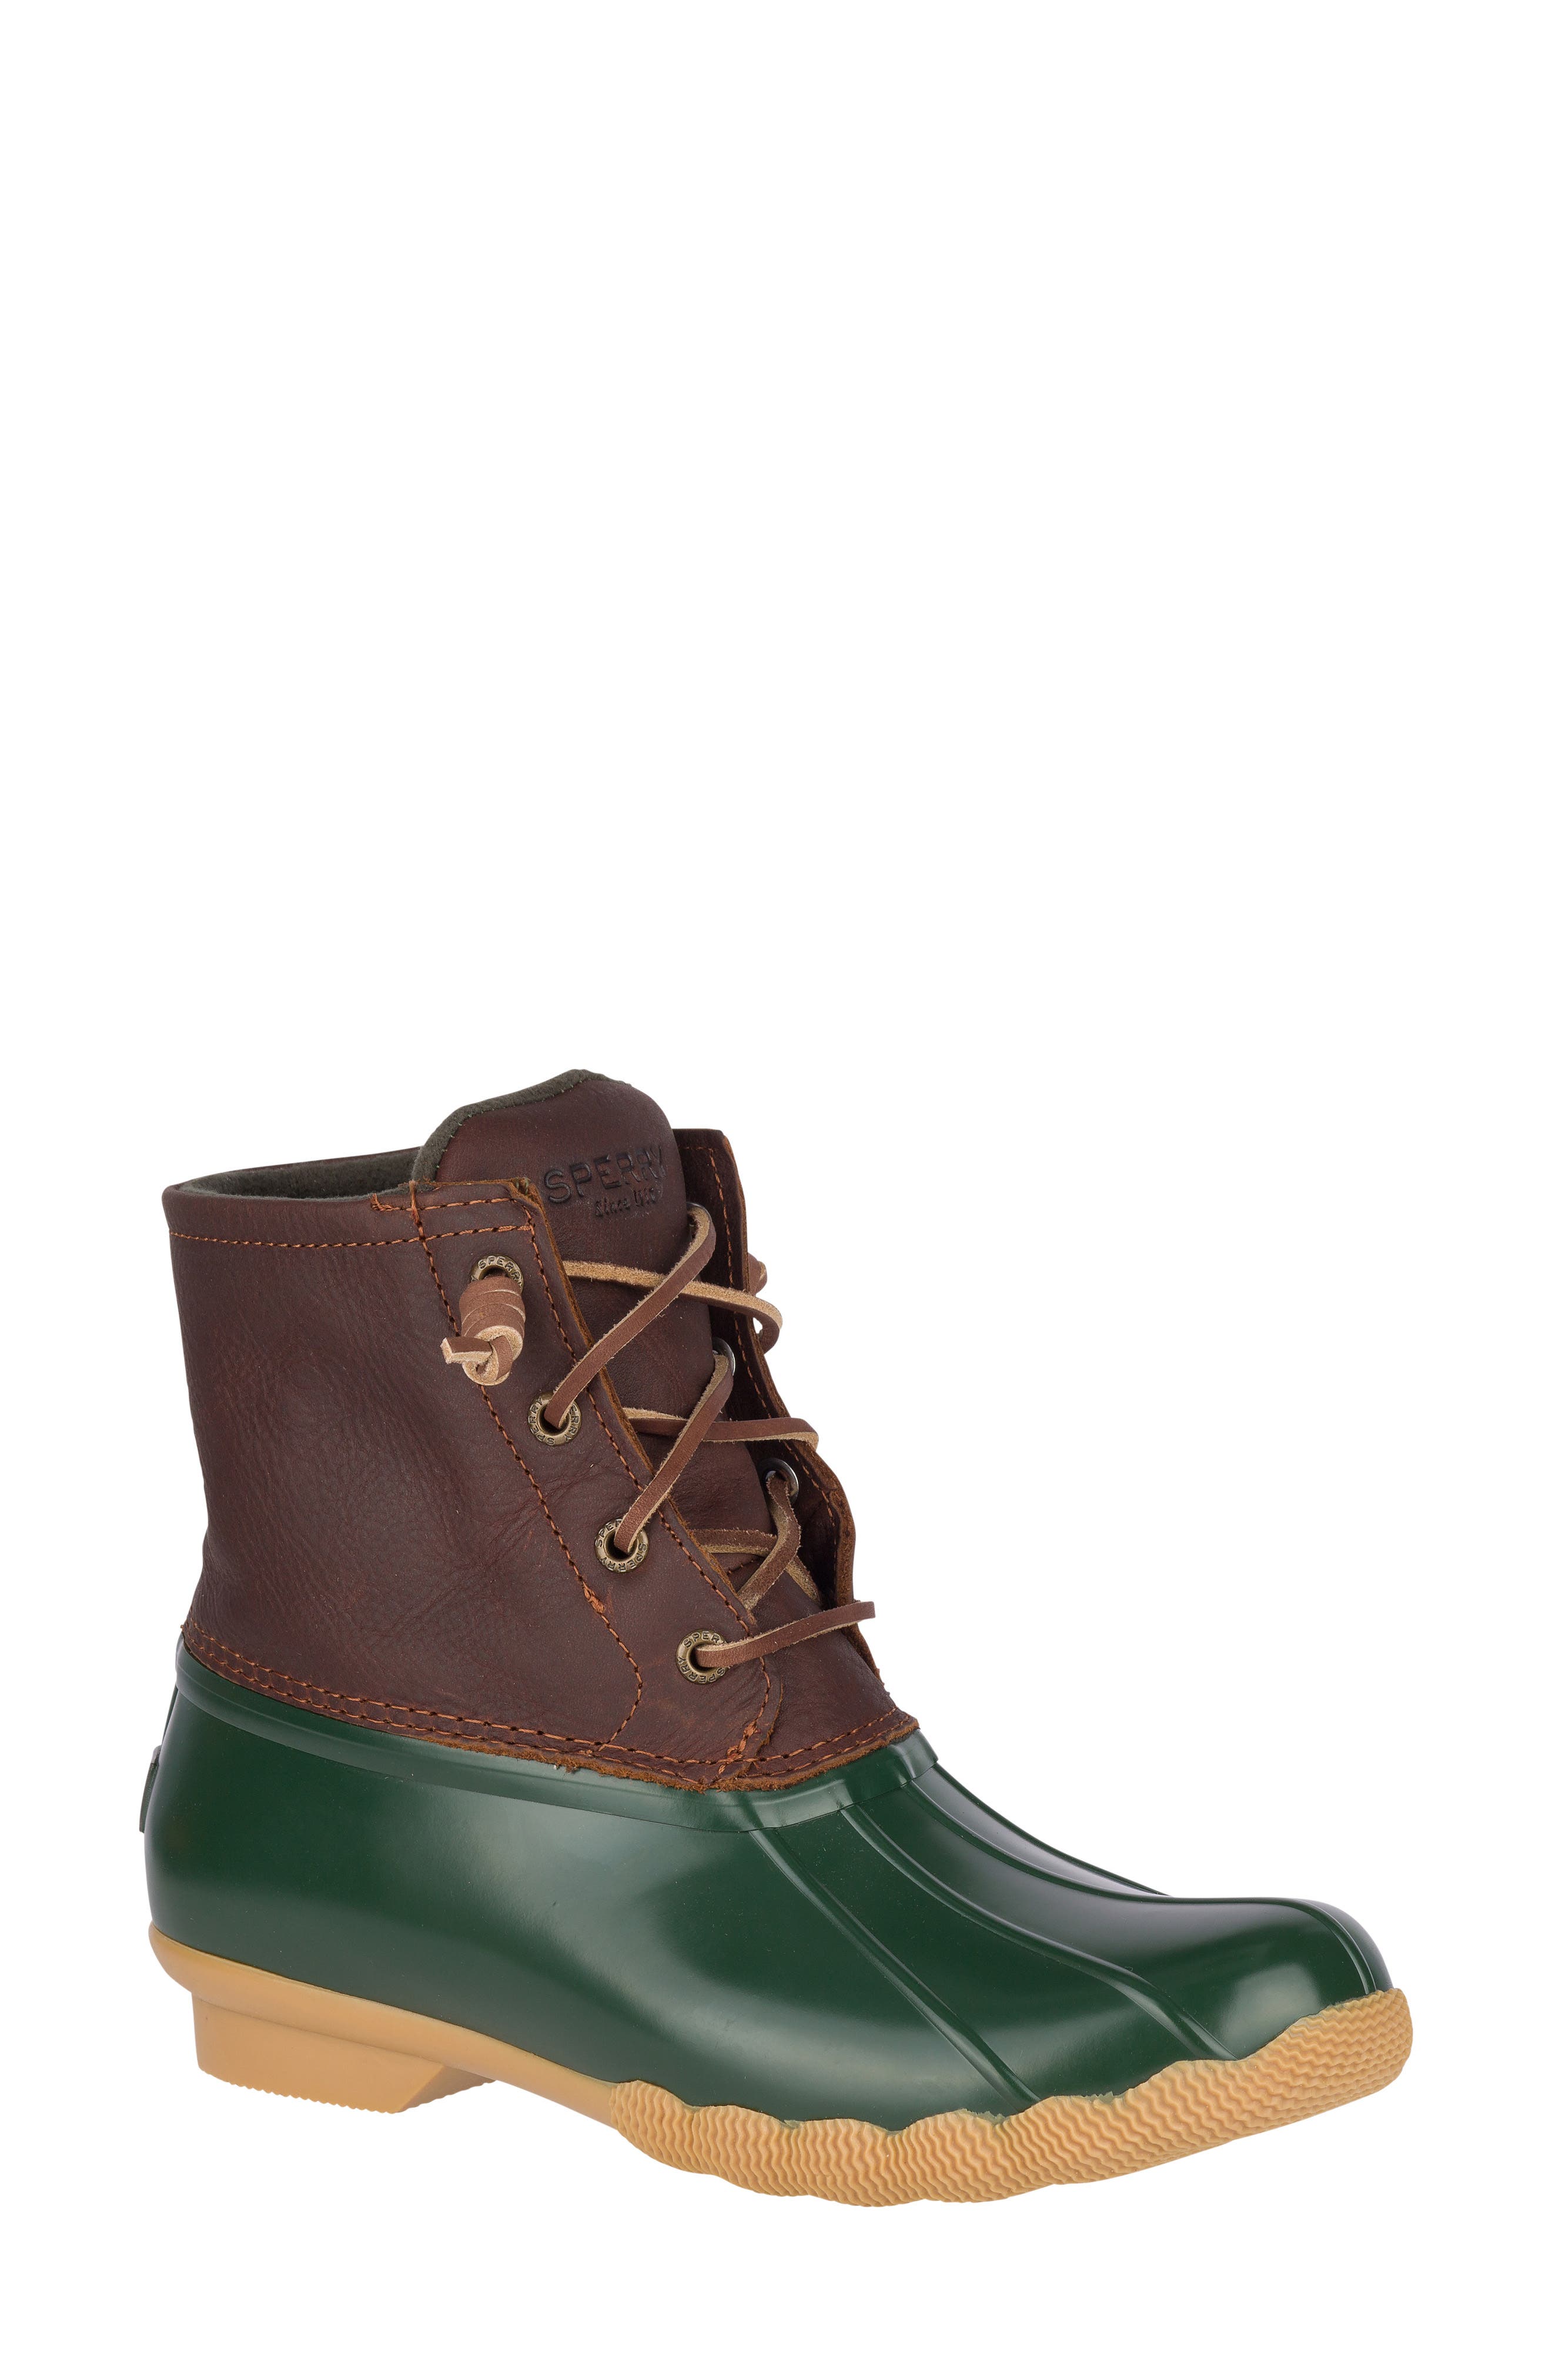 sperry duck boots wedge